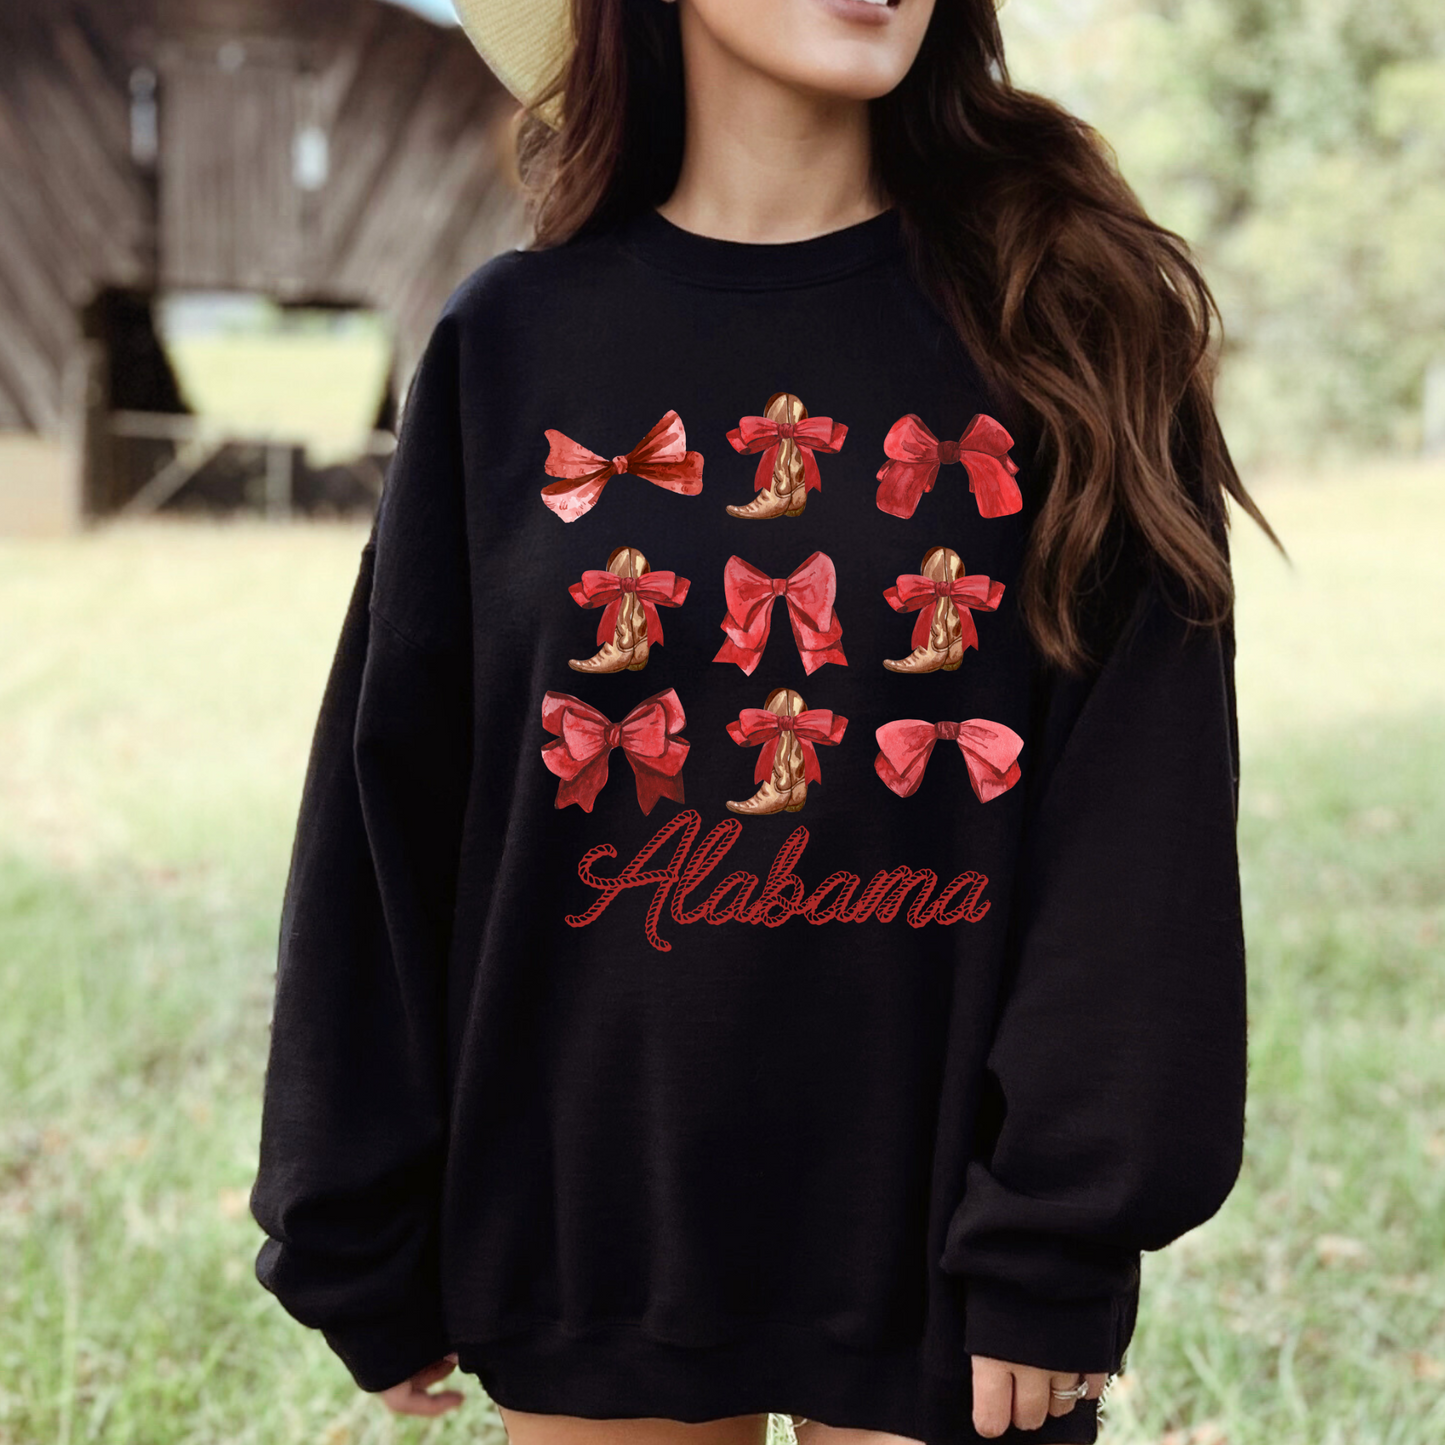 (shirt not included) Alabama boots and Bows - Clear Film Transfer